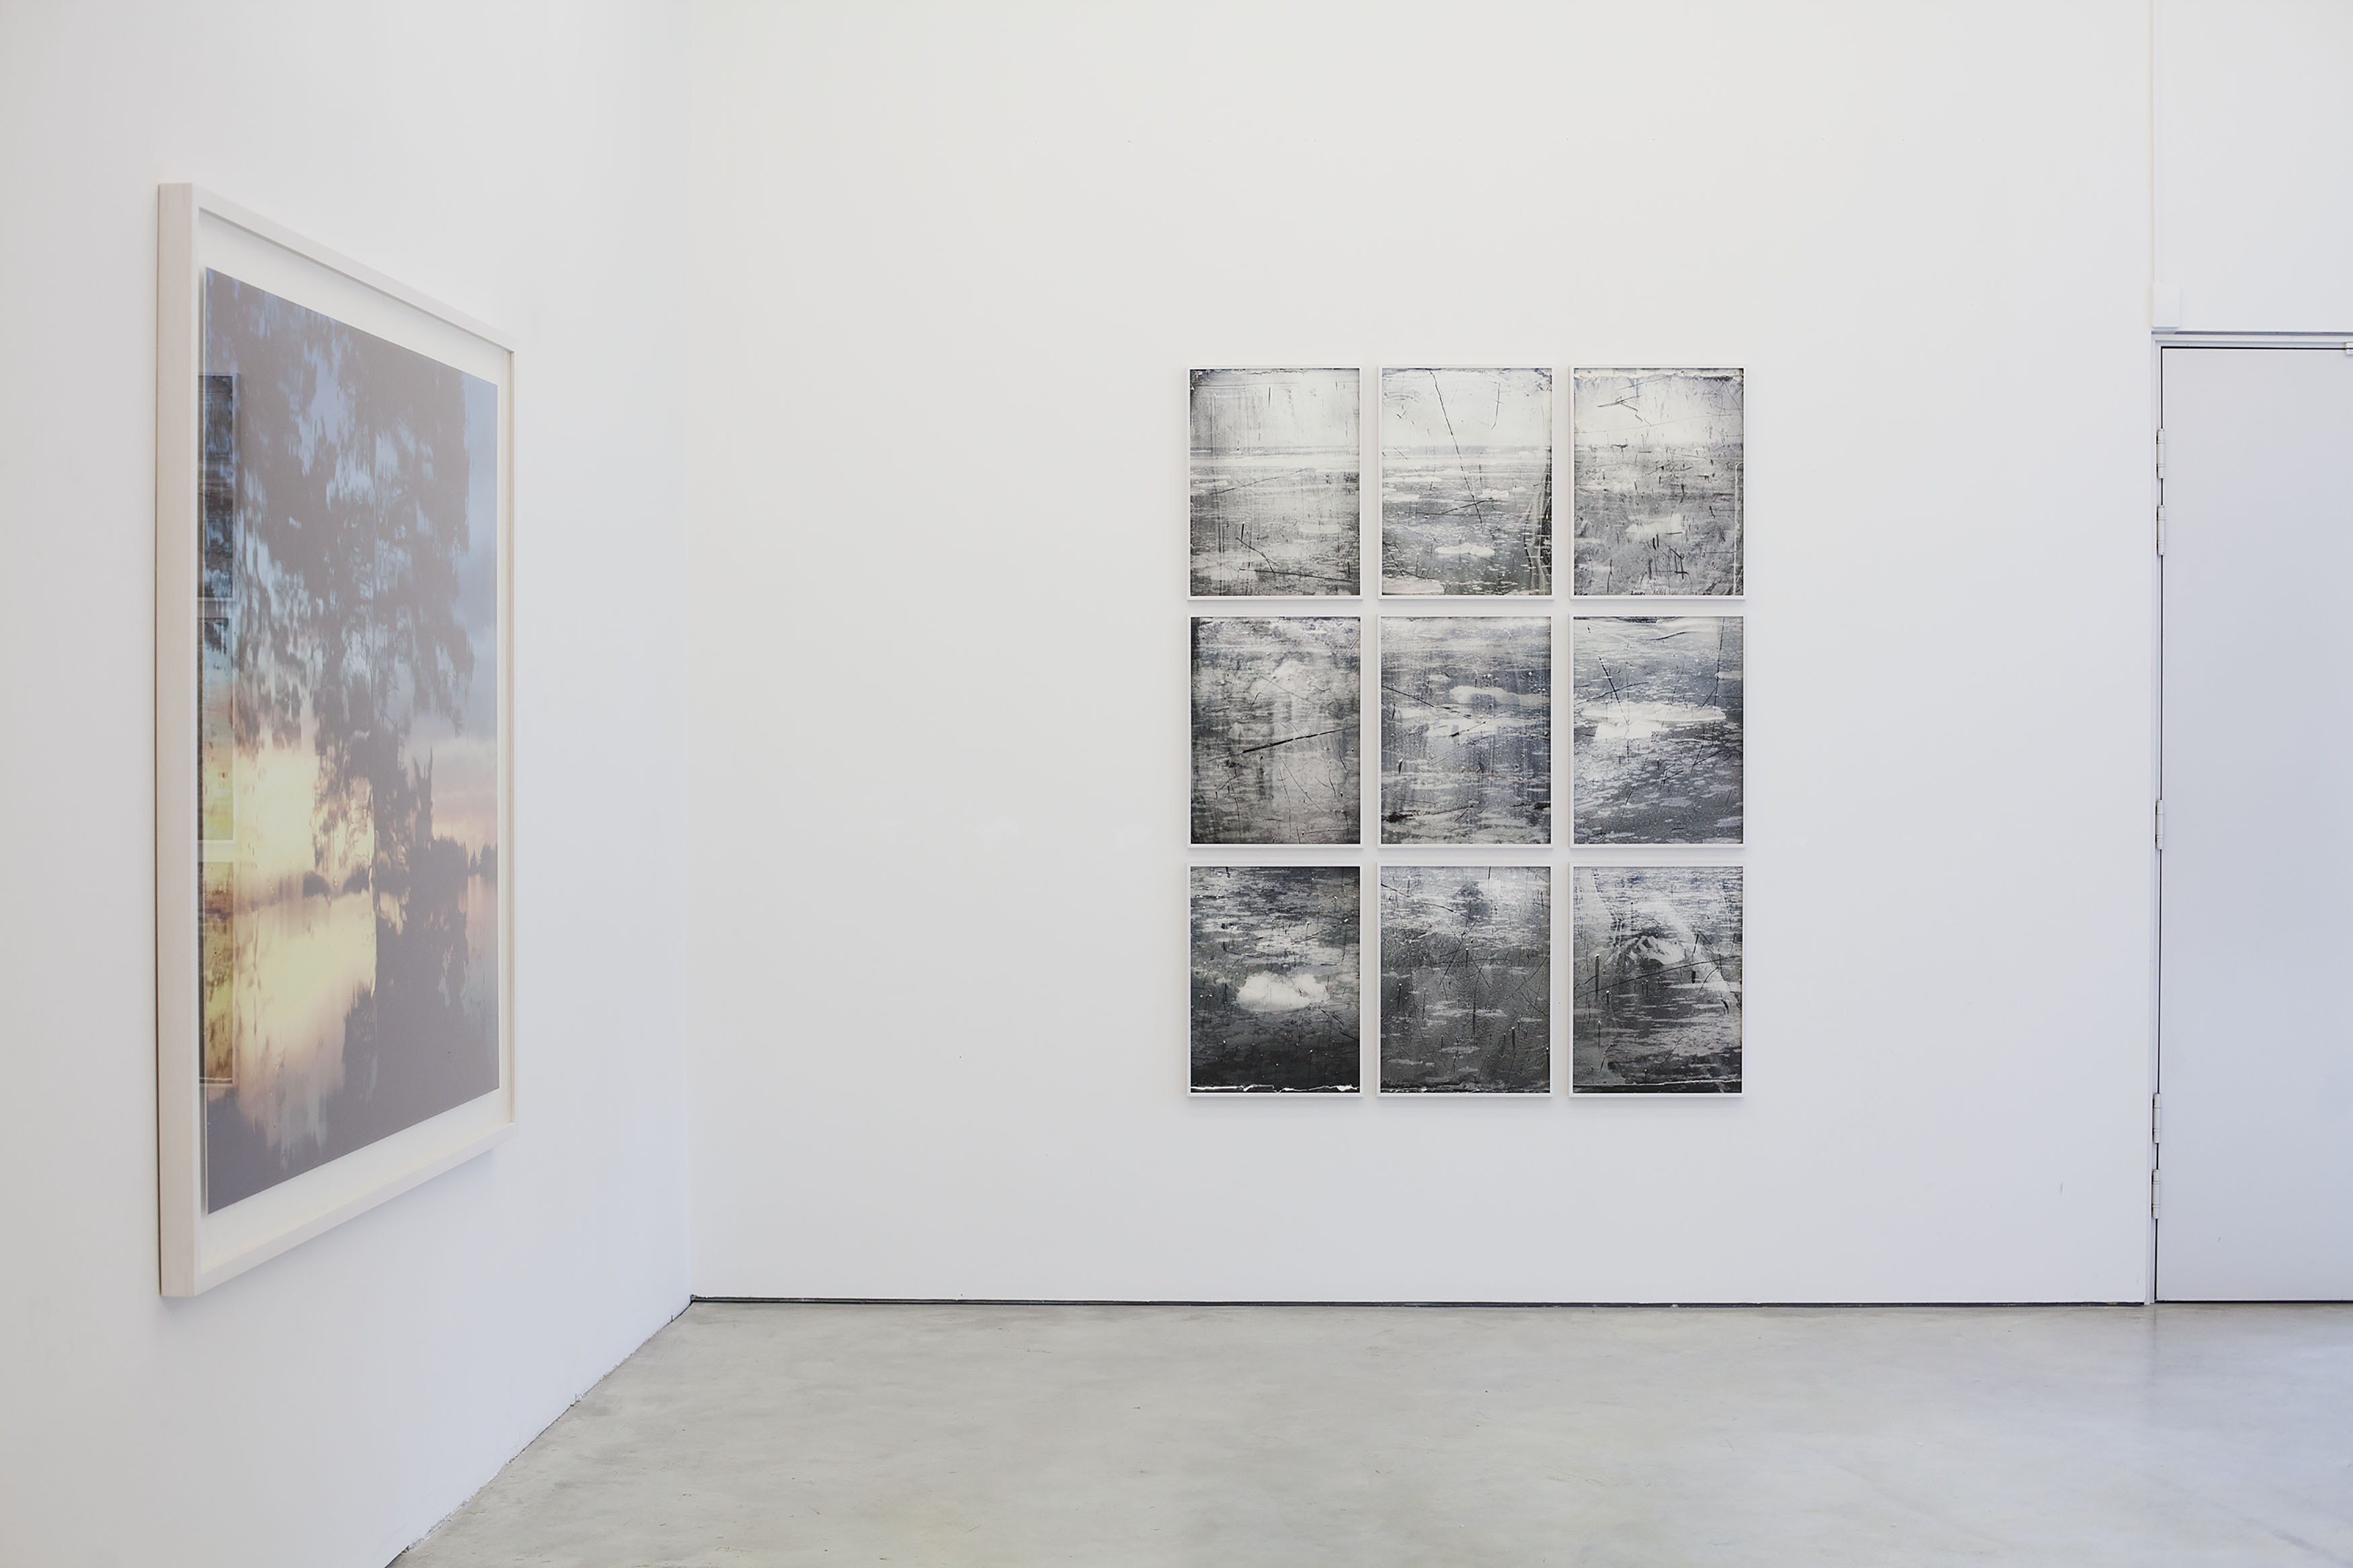 Installation View at Persons Projects, Berlin 2019